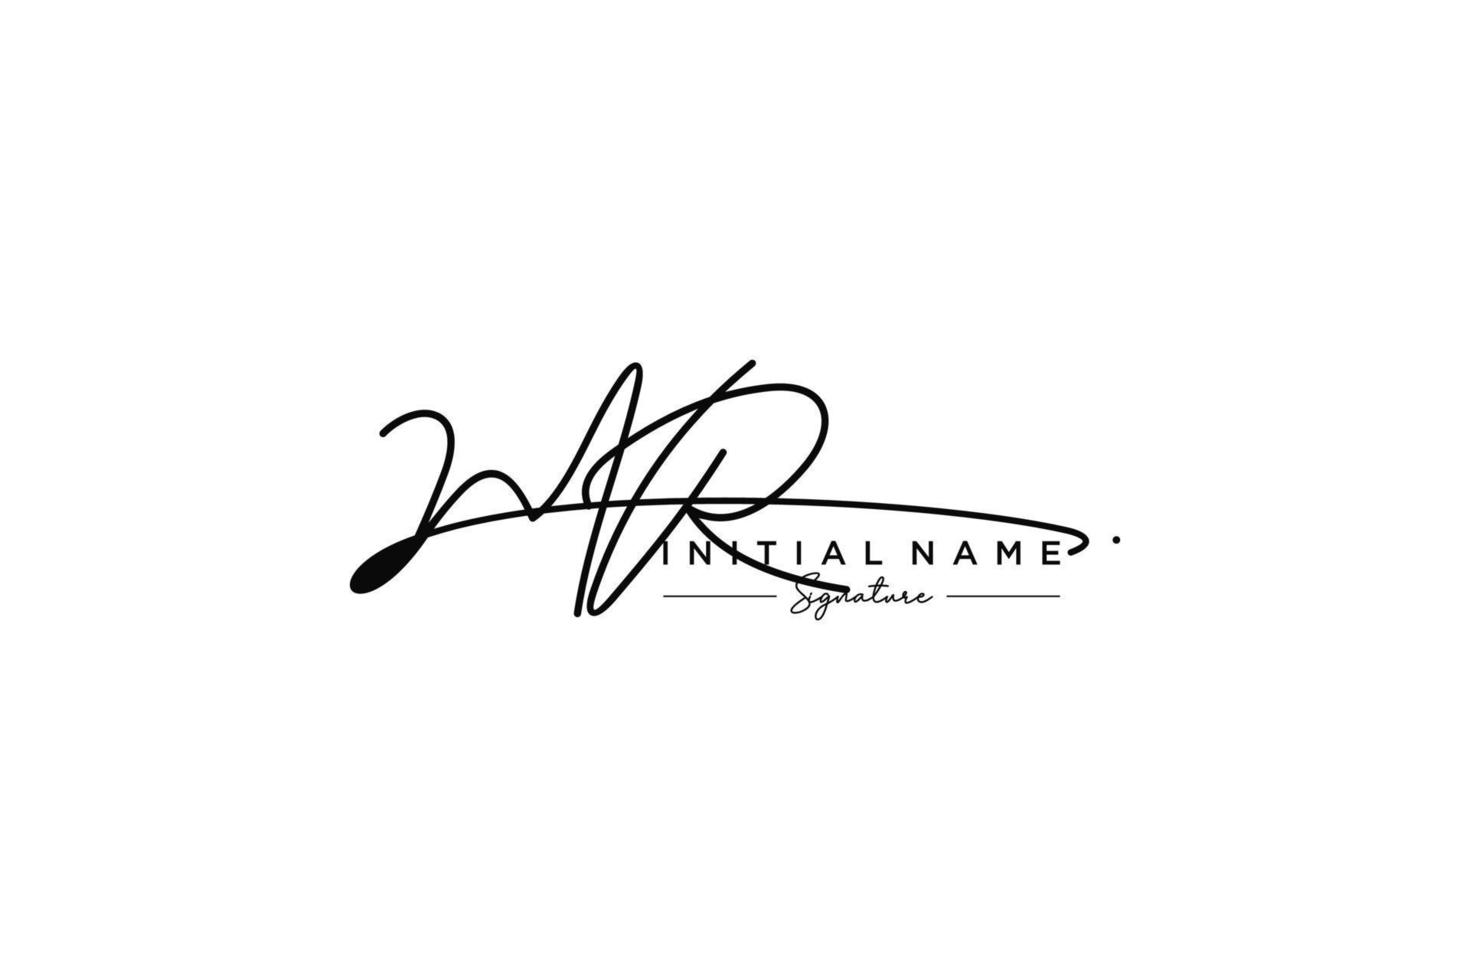 Initial MR signature logo template vector. Hand drawn Calligraphy lettering Vector illustration.